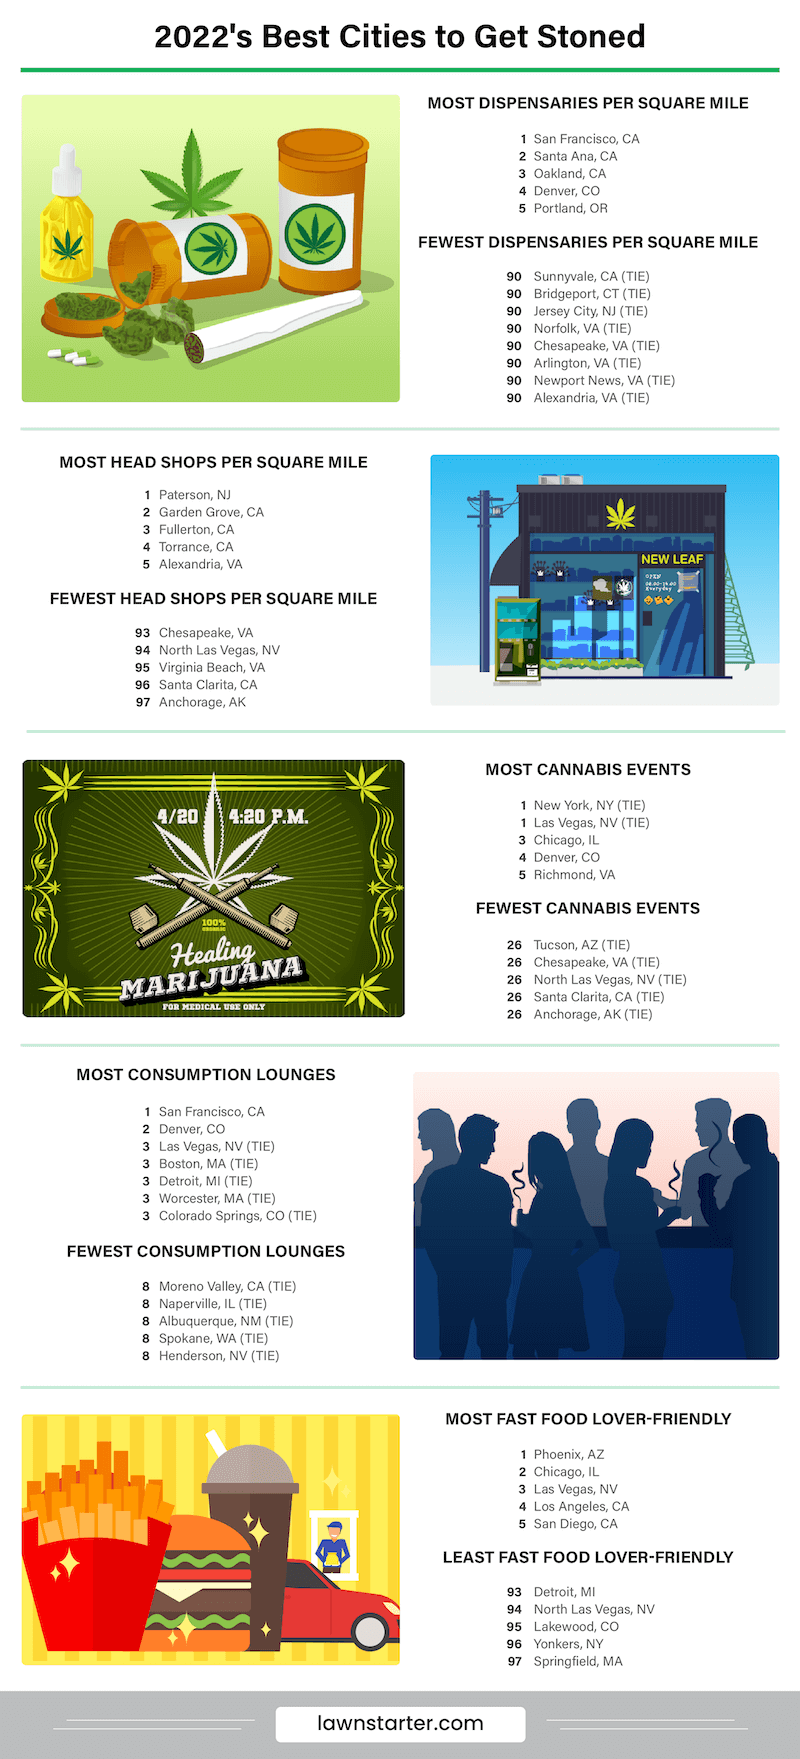 Infographic showing the best cities for marijuana lovers, a ranking based on access to dispensaries, head shops, consumption lounges, muchie relief, and community metrics